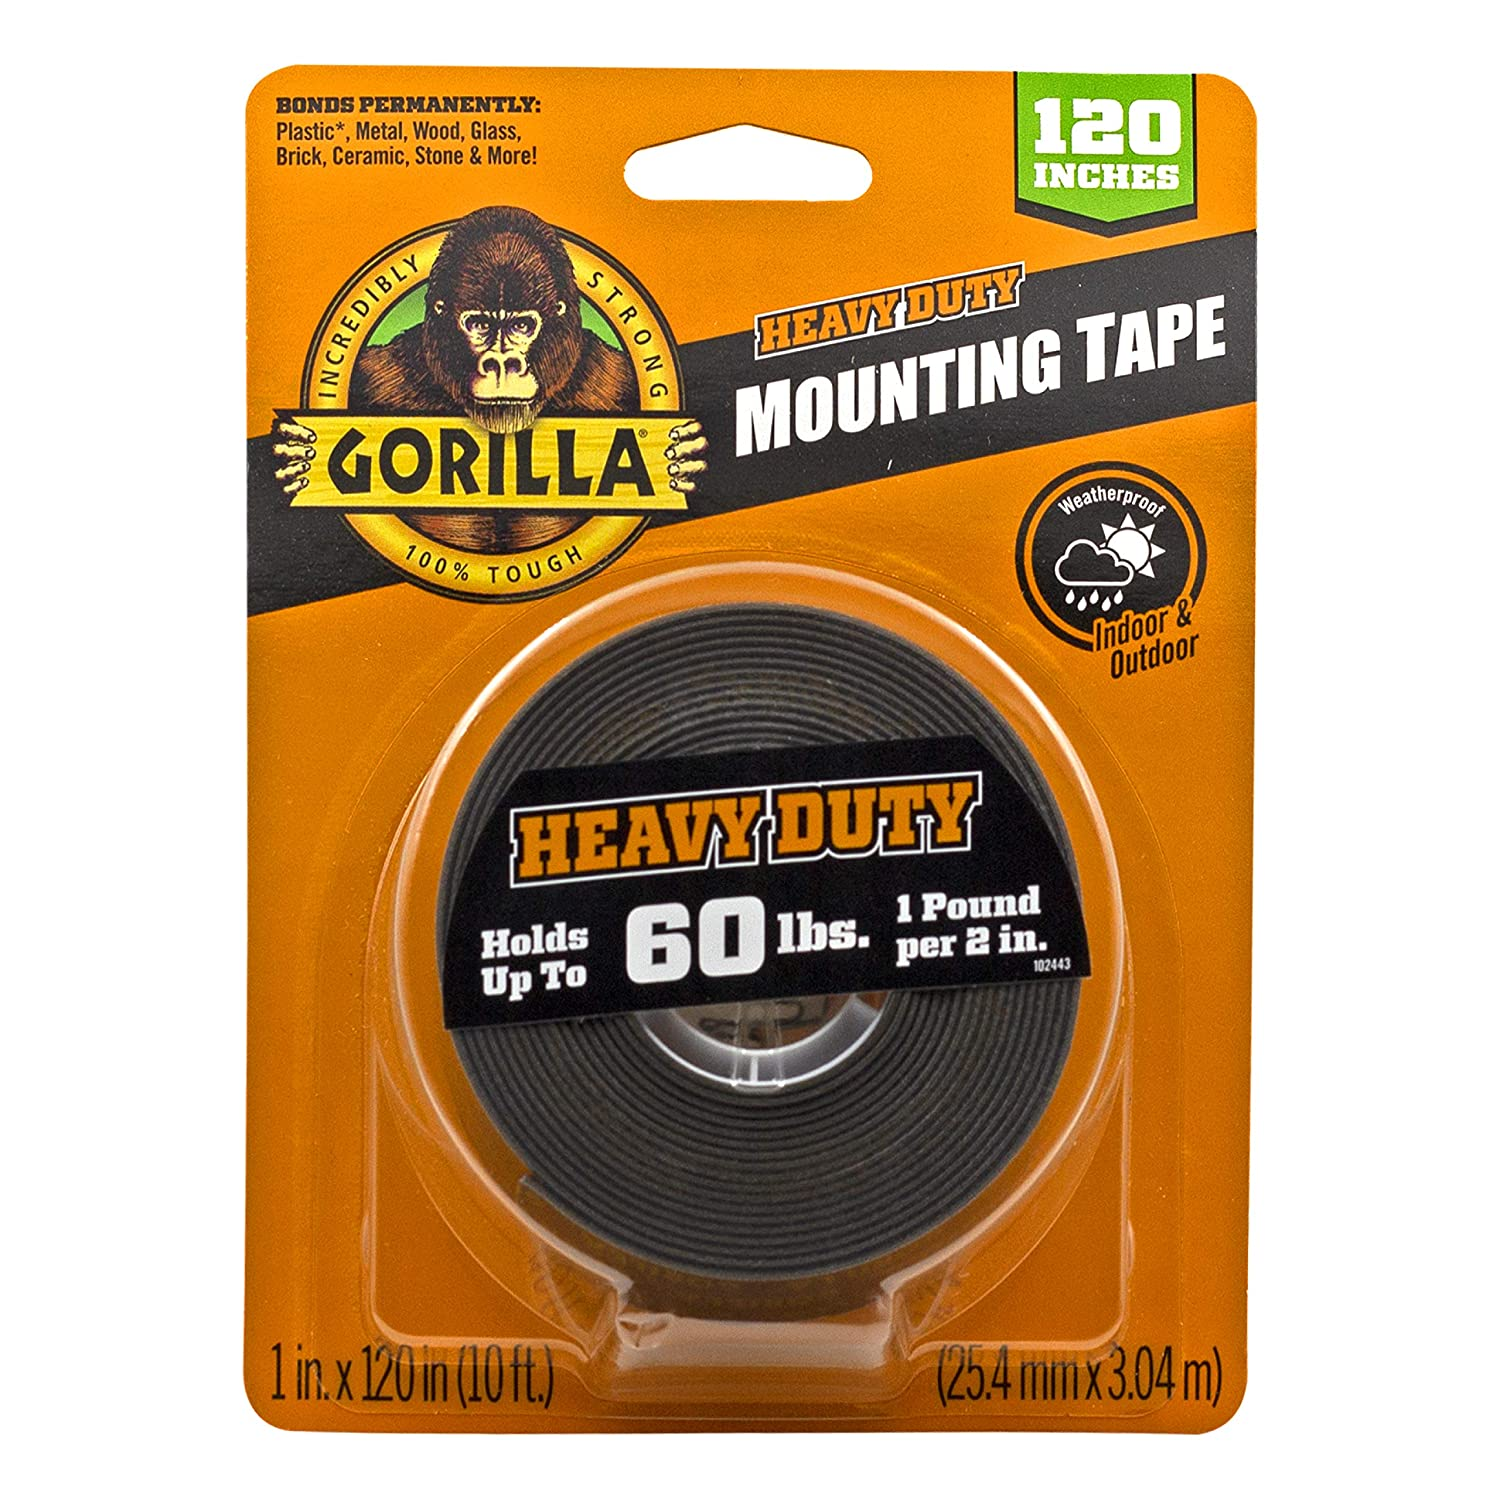 When it comes to strong tape, most people think gorilla tape!